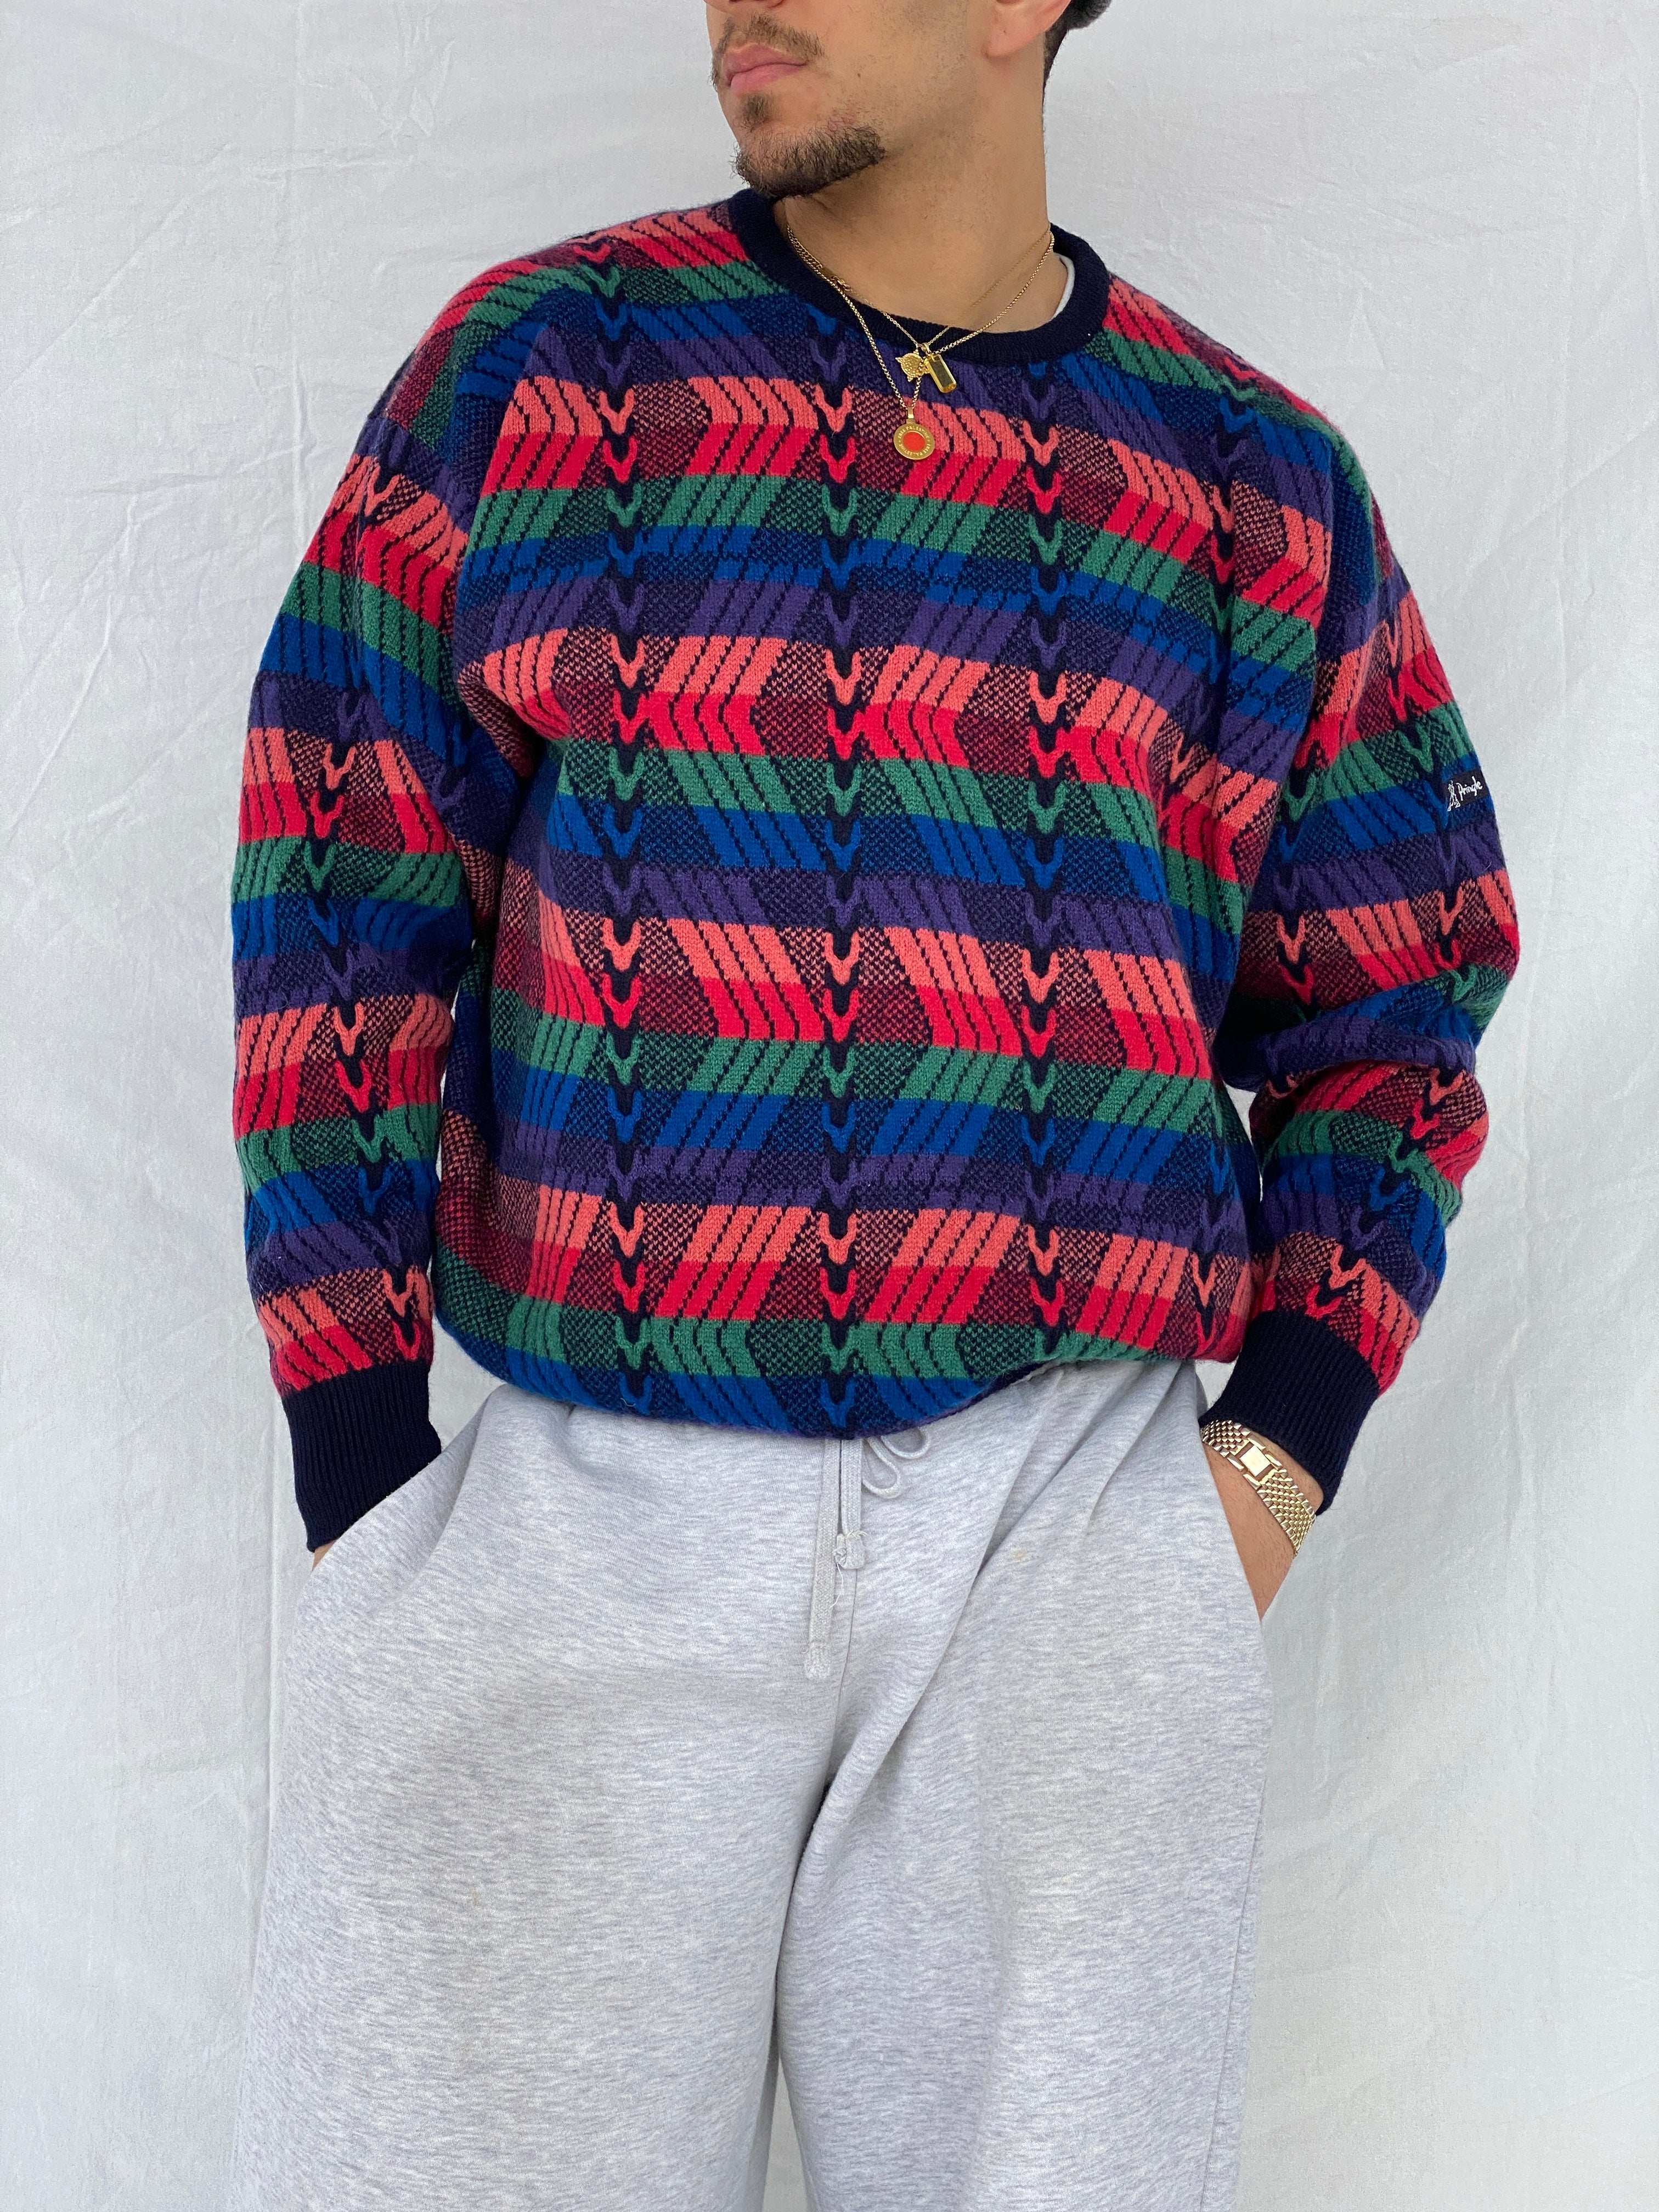 Vintage Nick Faldo Pringle Multicolored Knitted Sweater - Size M/L - Balagan Vintage Sweater 80s, 90s, Abdullah, knitted sweater, sweater, vintage sweater